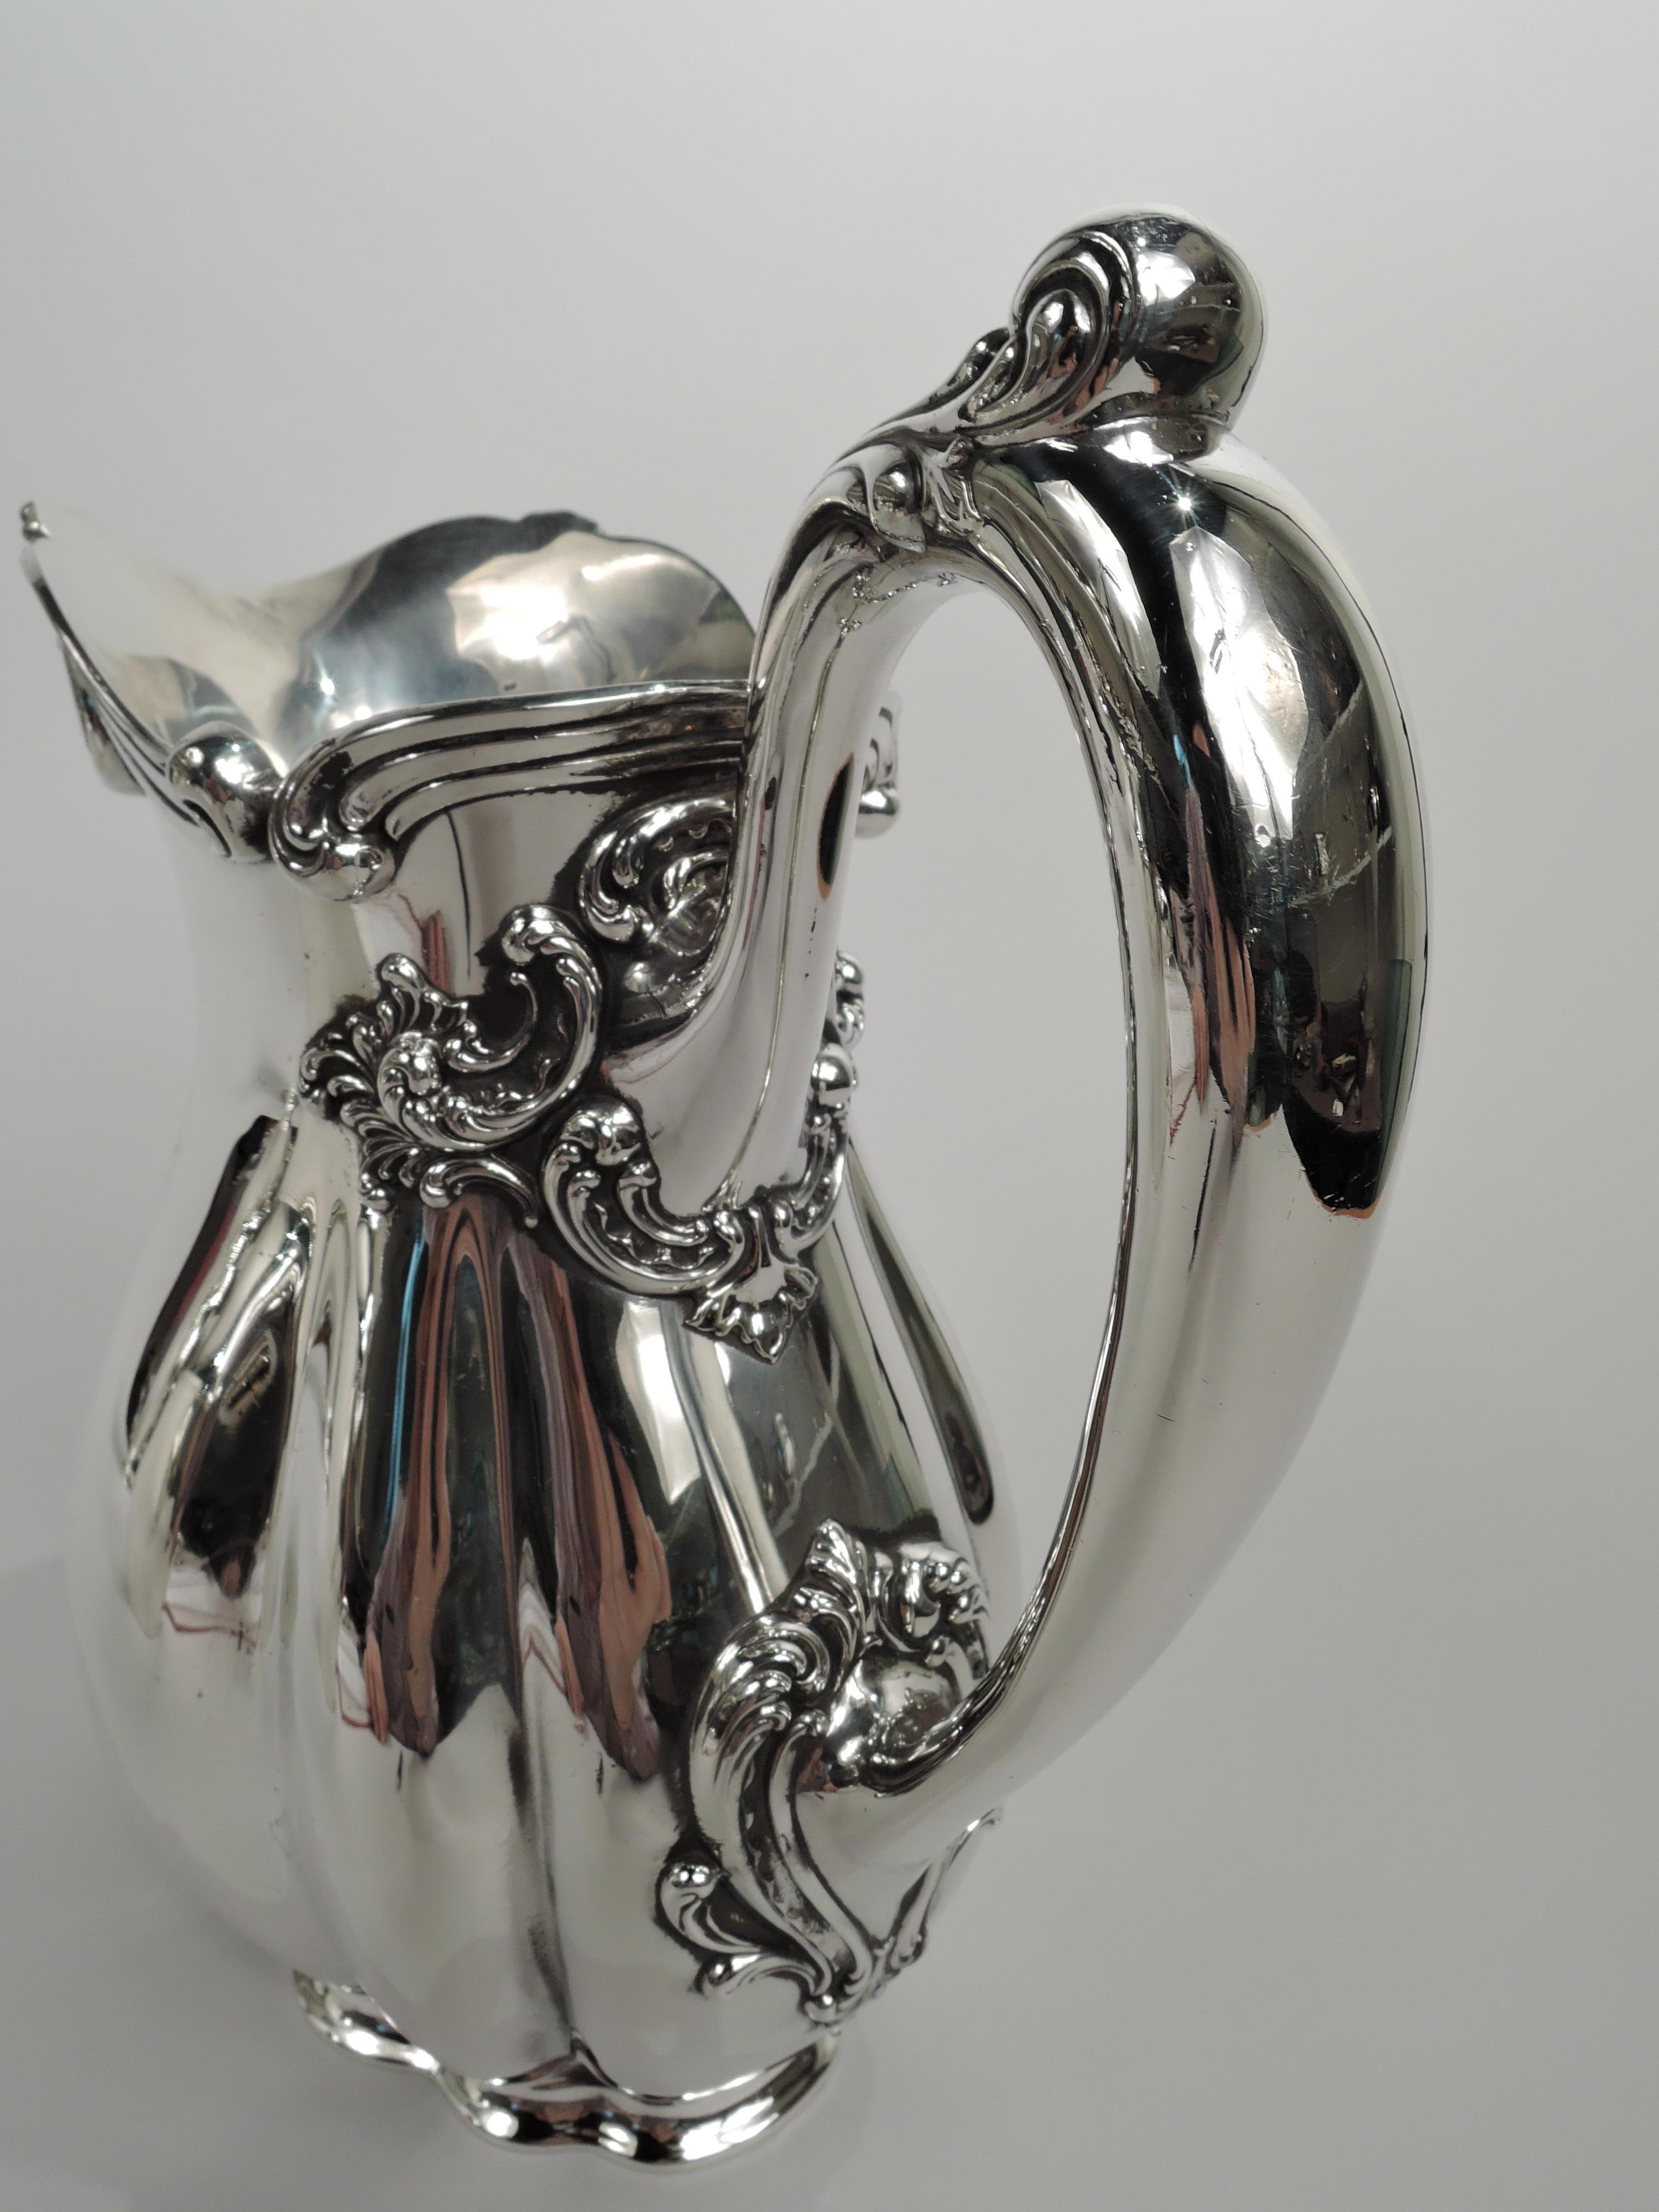 Antique American Edwardian Sterling Silver Water Pitcher In Excellent Condition For Sale In New York, NY